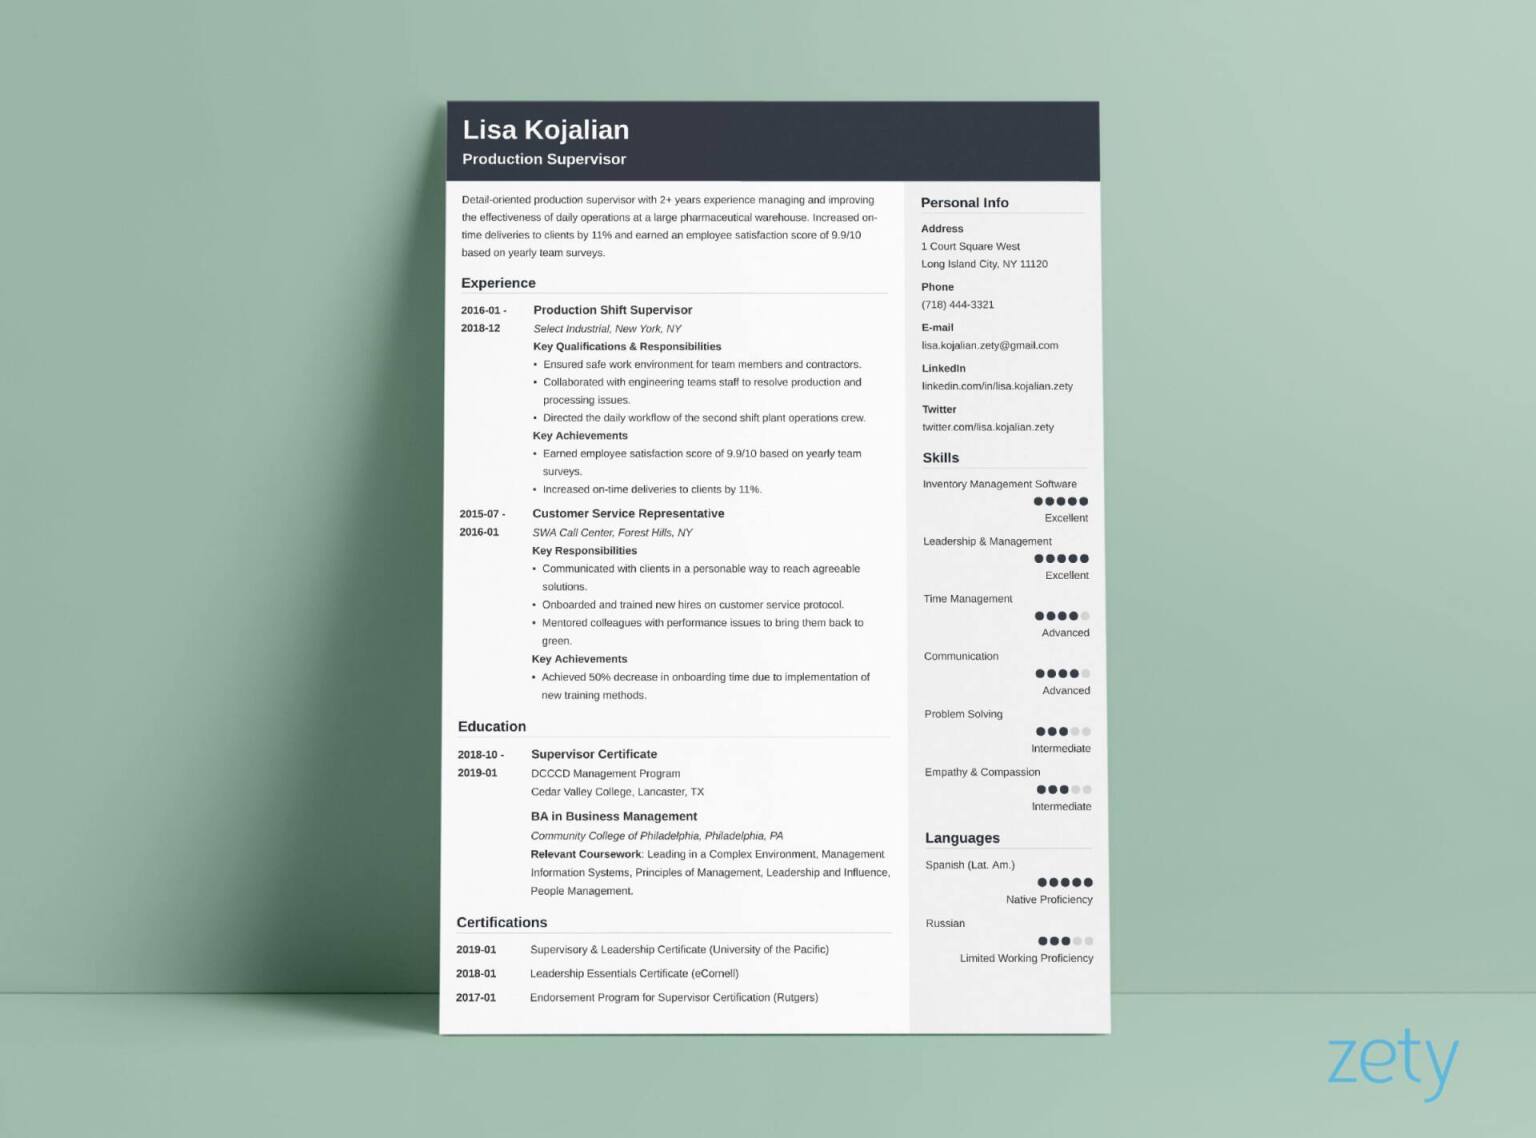 Resume Layout 2018 from cdn-images.zety.com